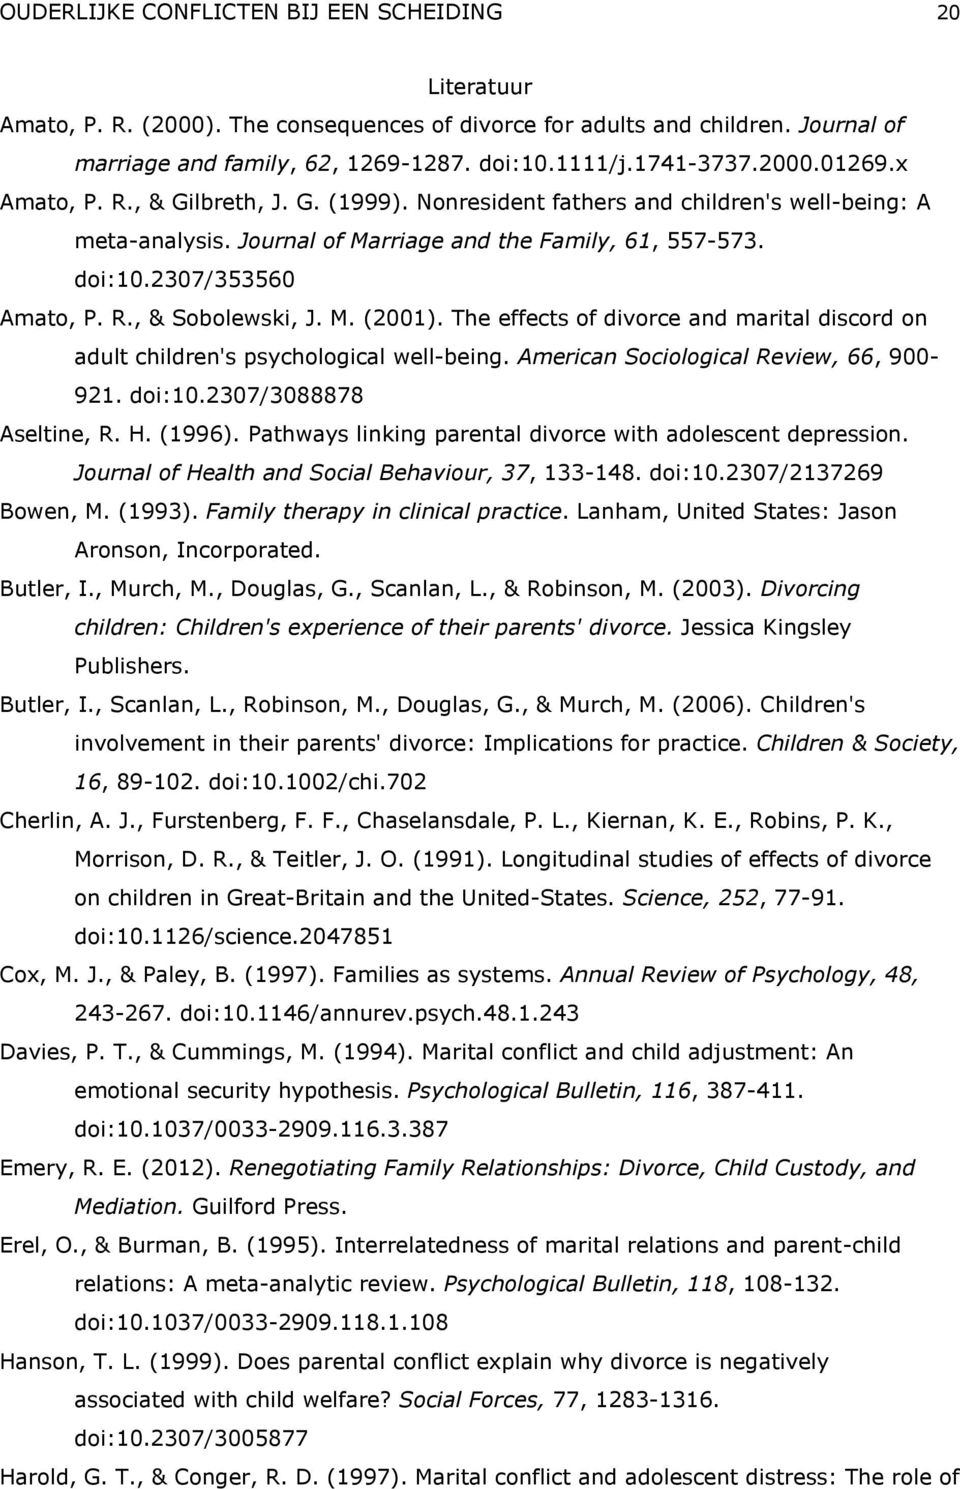 M. (2001). The effects of divorce and marital discord on adult children's psychological well-being. American Sociological Review, 66, 900-921. doi:10.2307/3088878 Aseltine, R. H. (1996).